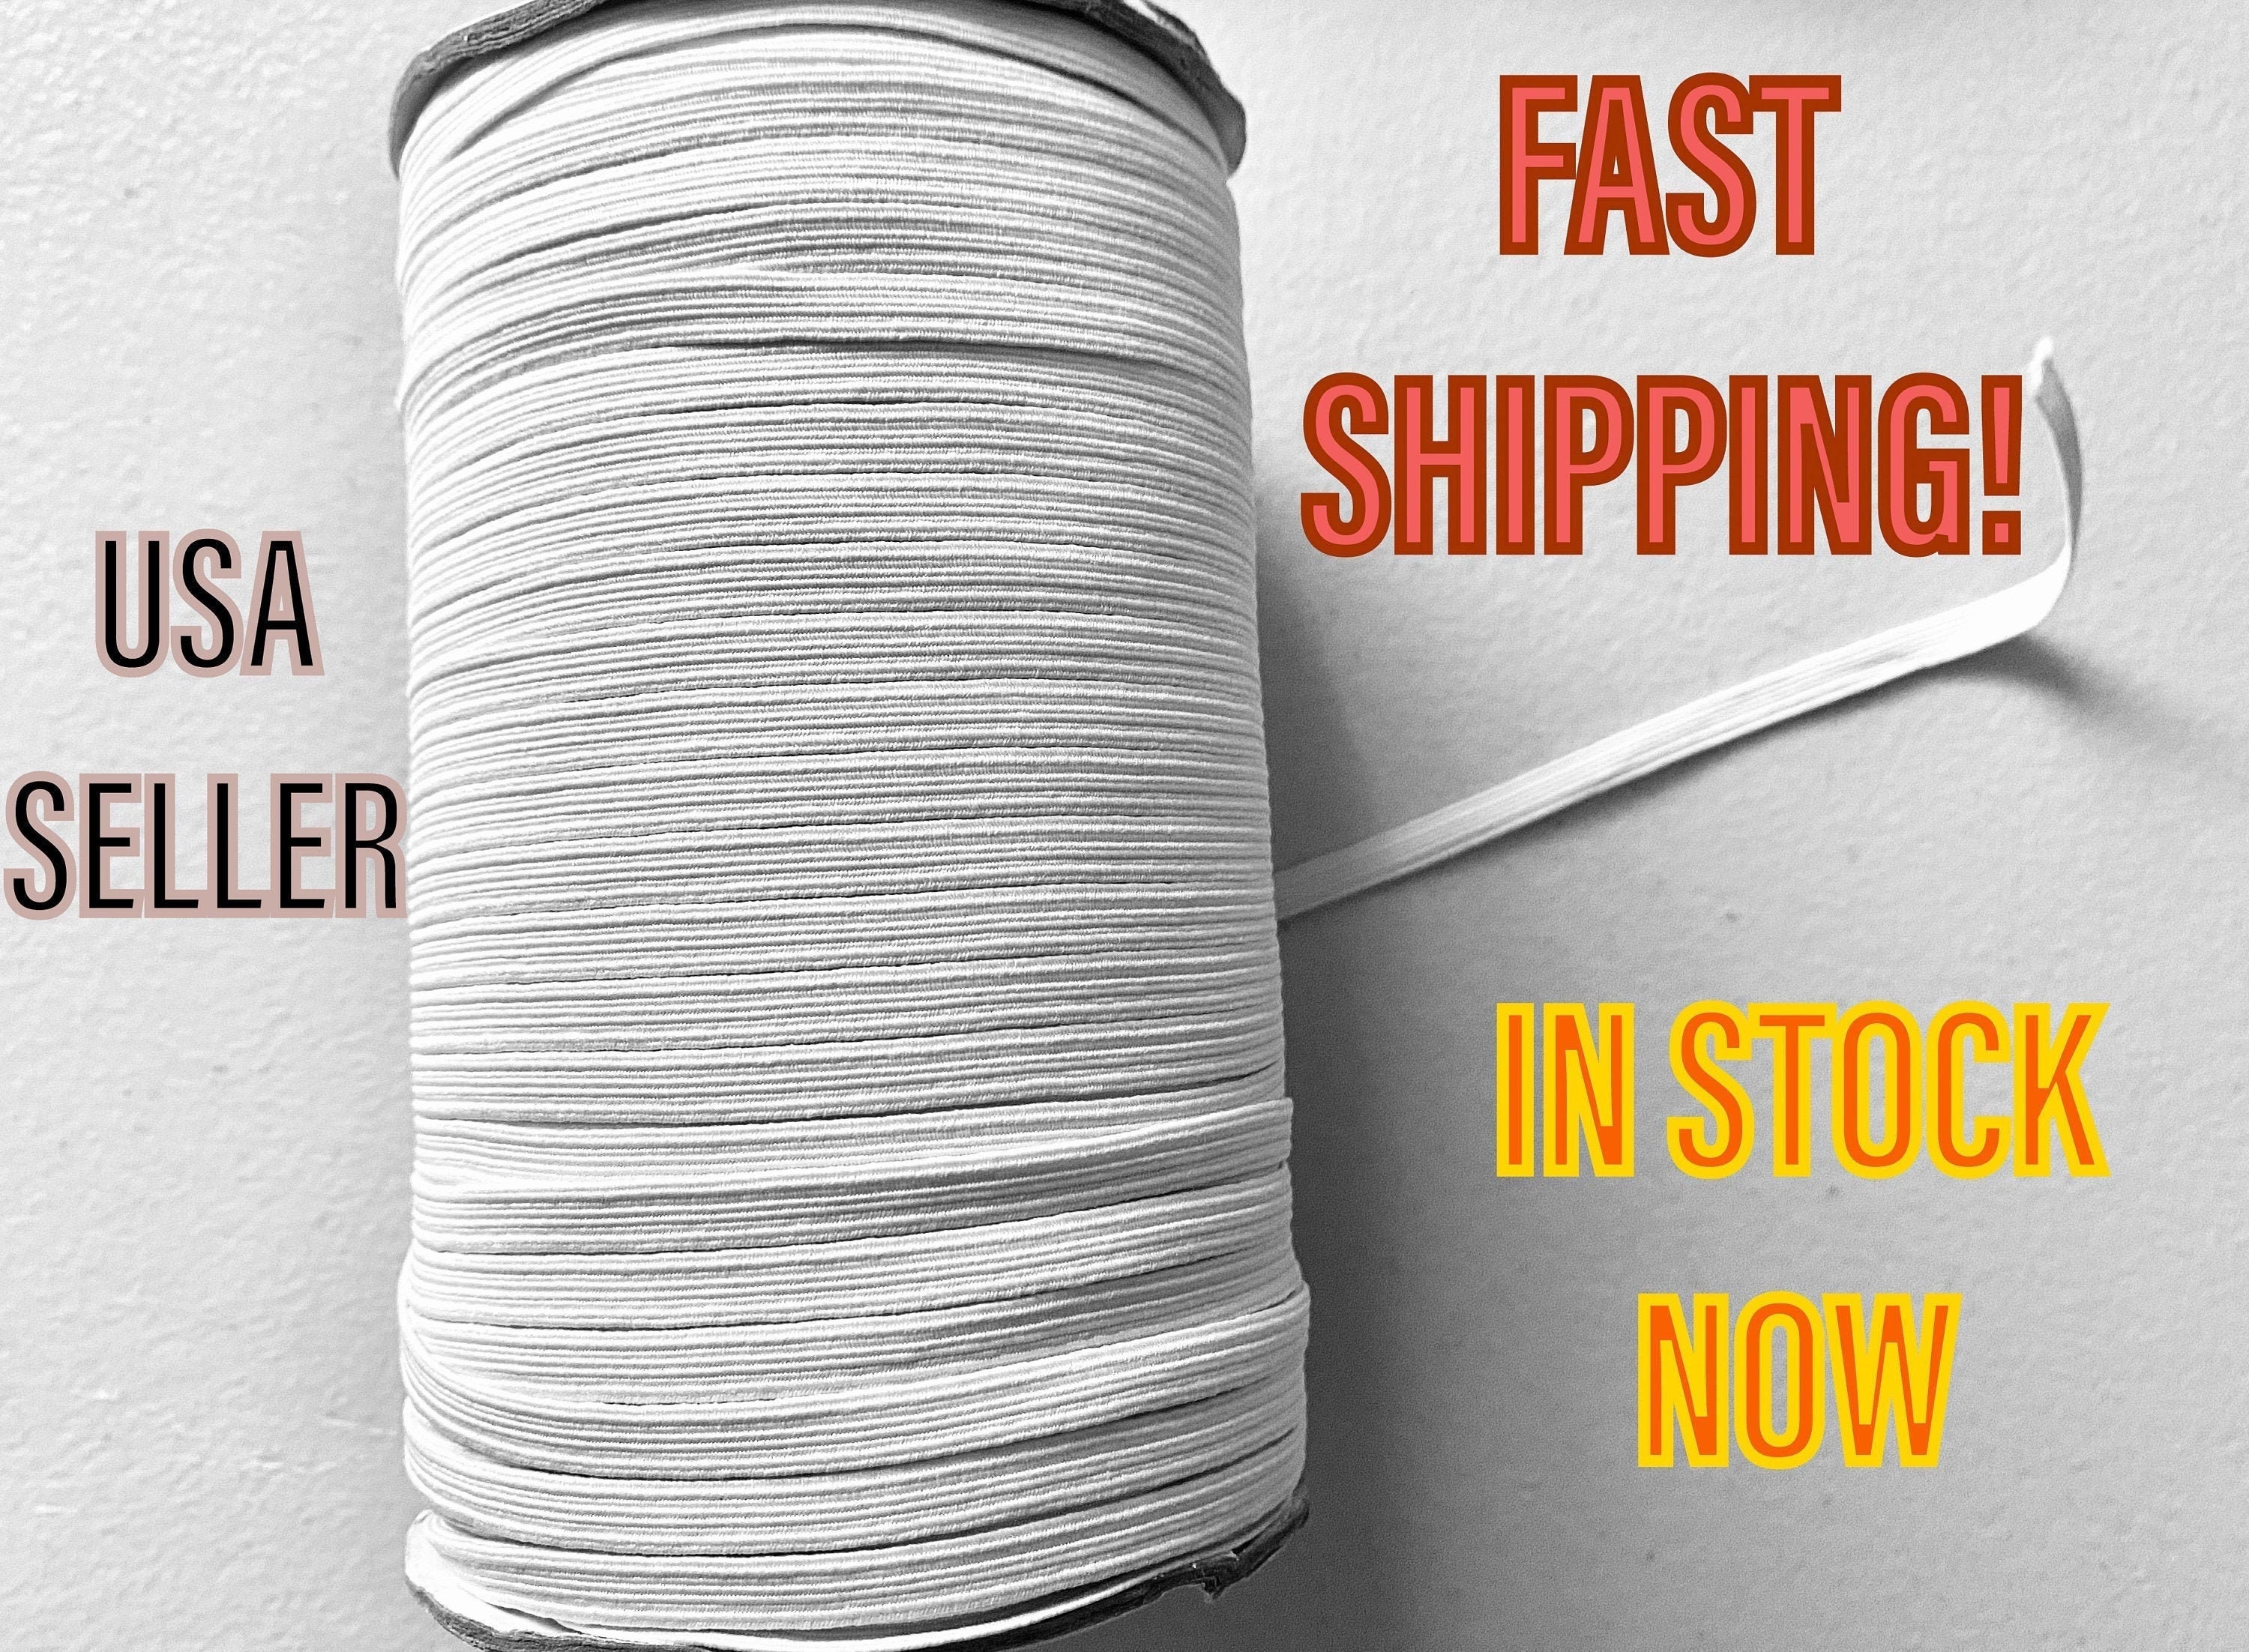 50 Yards 1/4 inch Flat Braided white Elastic Band for Sewing Craft DIY 